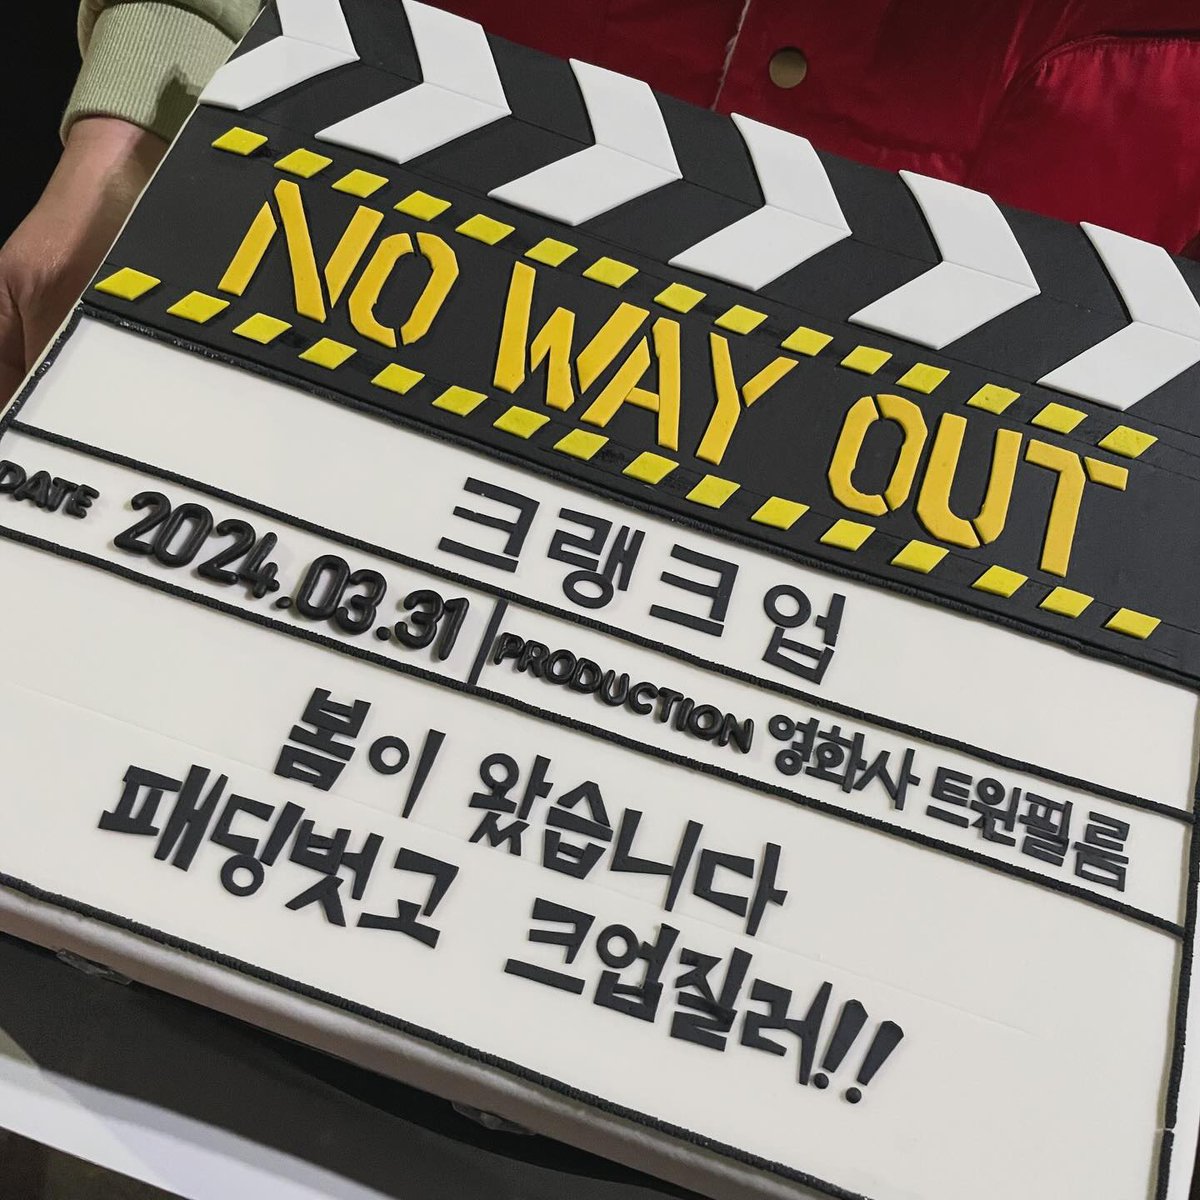 No Way Out finished filming yesterday.  No Way Out will be released in the second half of the year. #NoWayOut #노웨이아웃 #ChoJinWoong #조진웅 #YooJaeMyung #유재명 #KimMooYul #김무열 #YumJungAh #염정아 #LeeKwangSoo #이광수 #SungYooBin #성유빈 #GregHsu #허광한